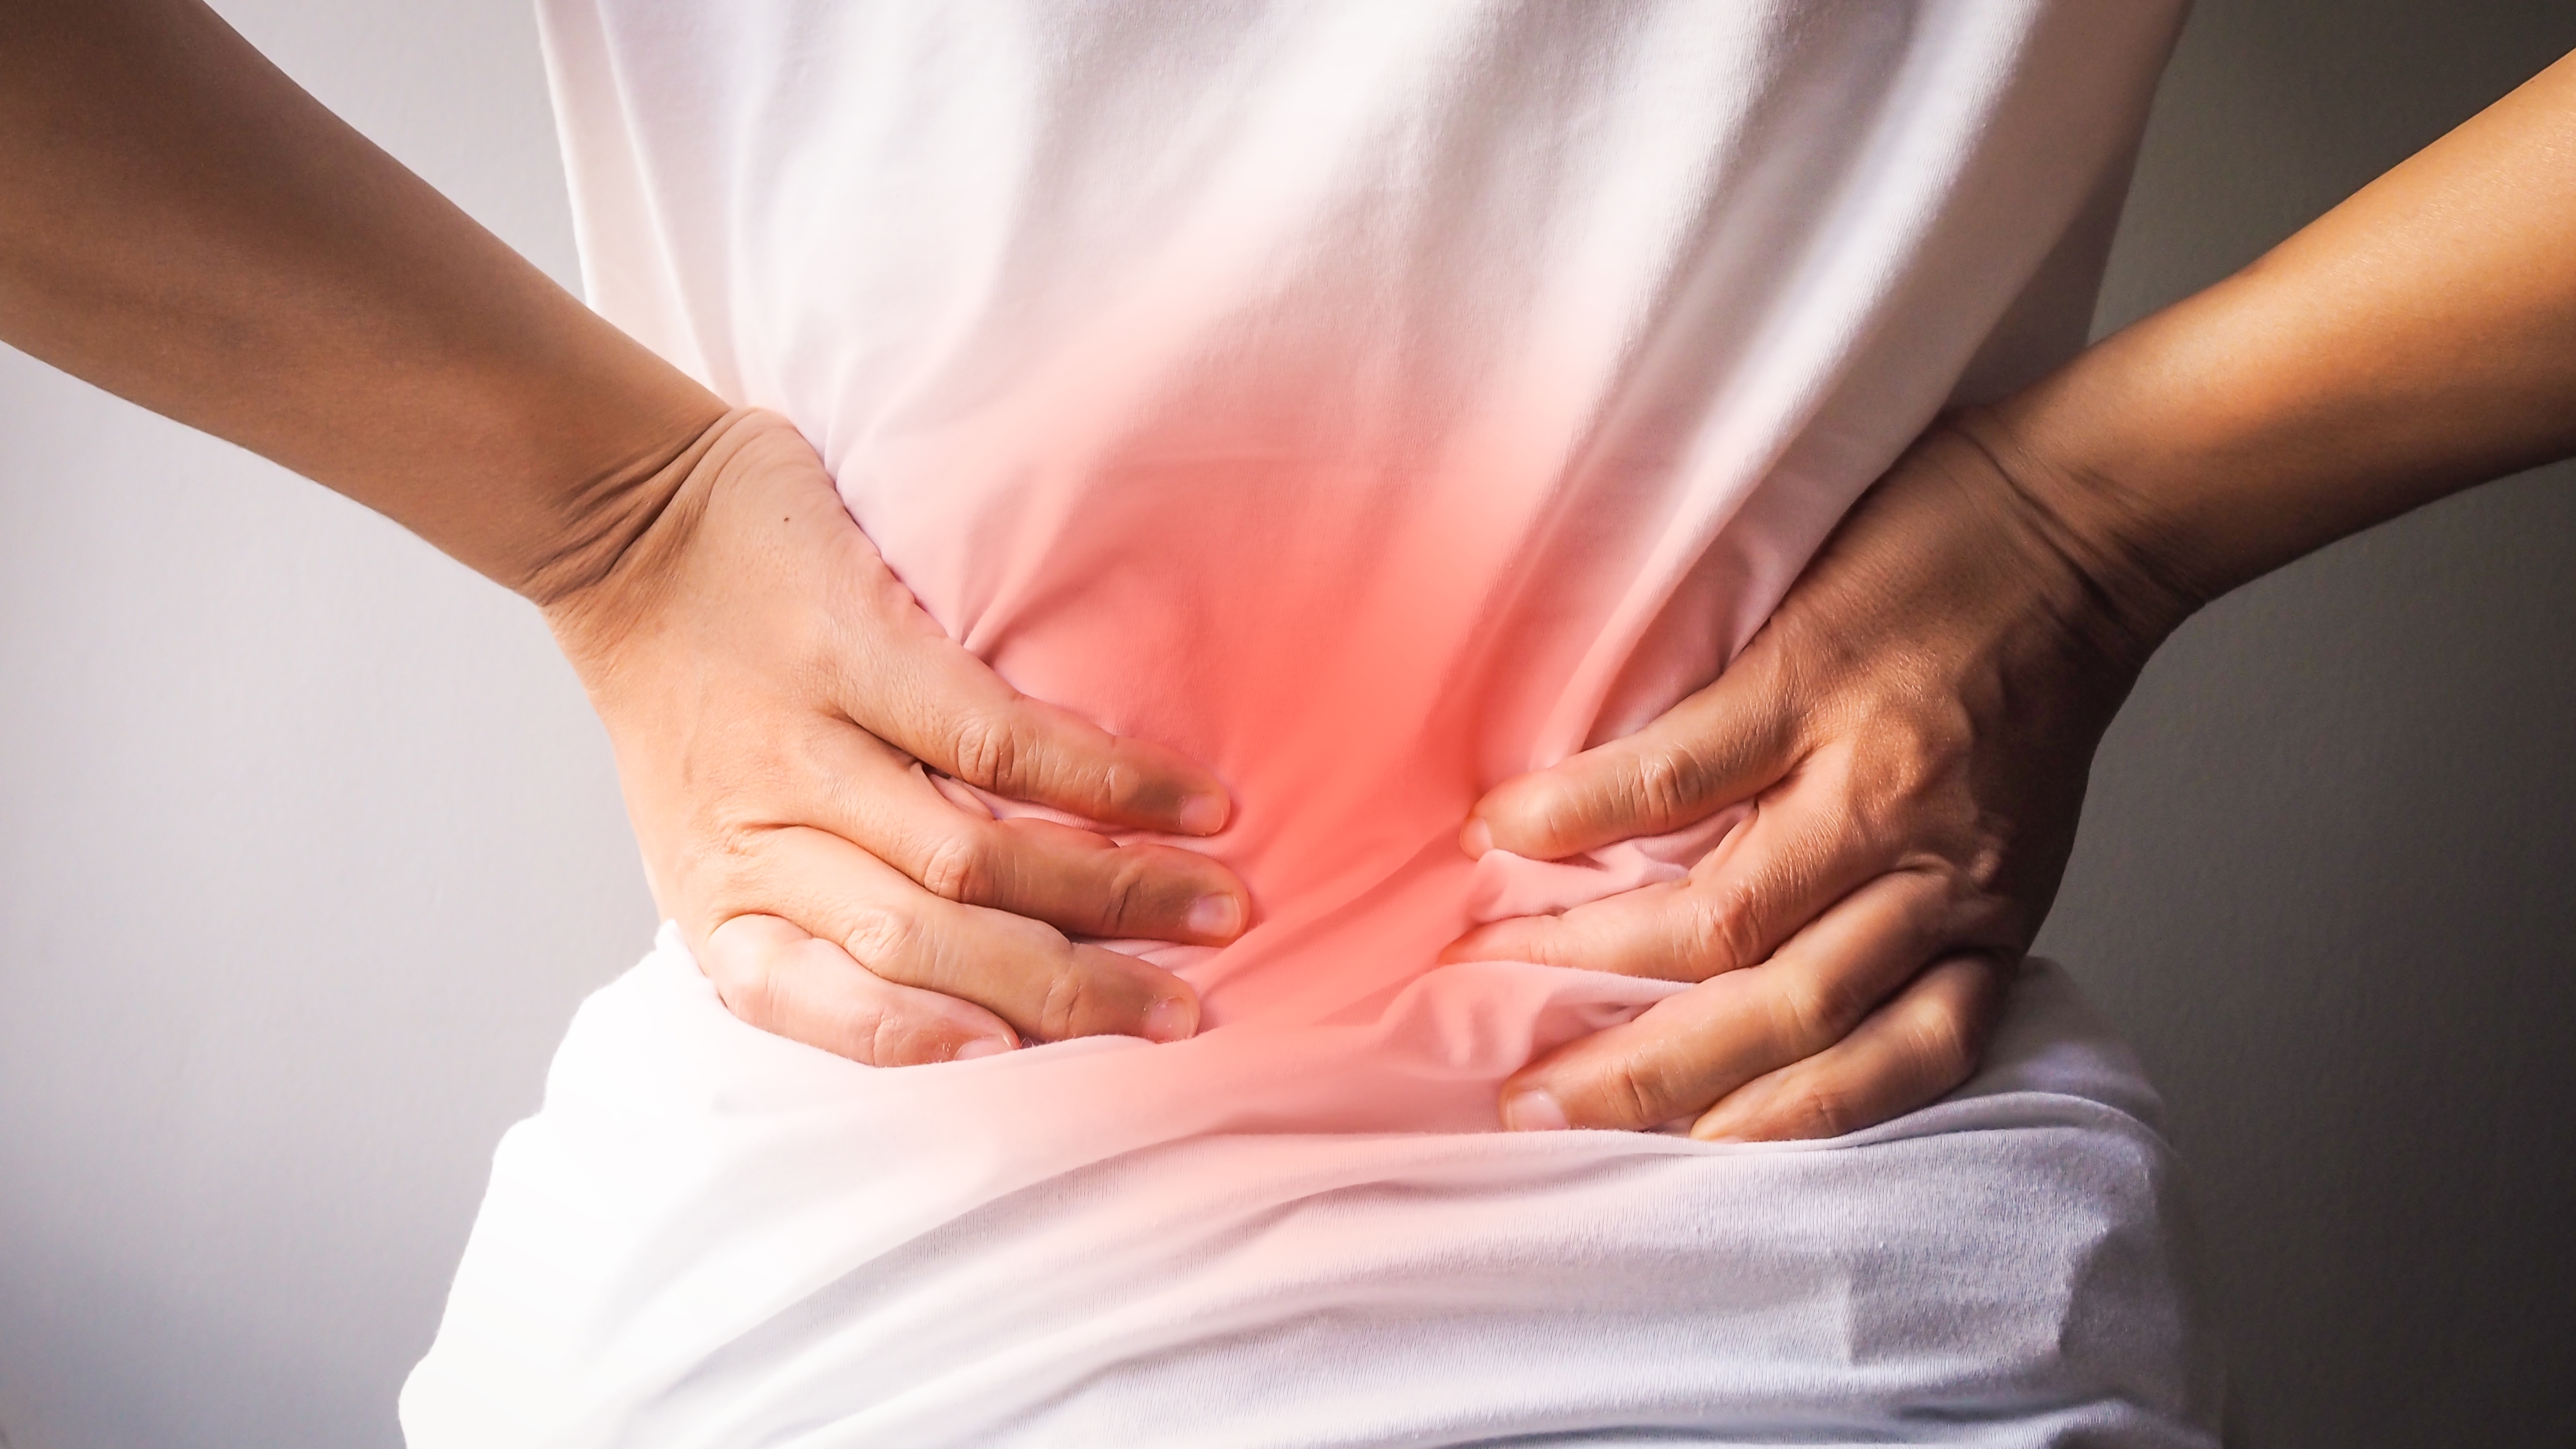 Person clutching their lower back in pain. (Source: Envato)